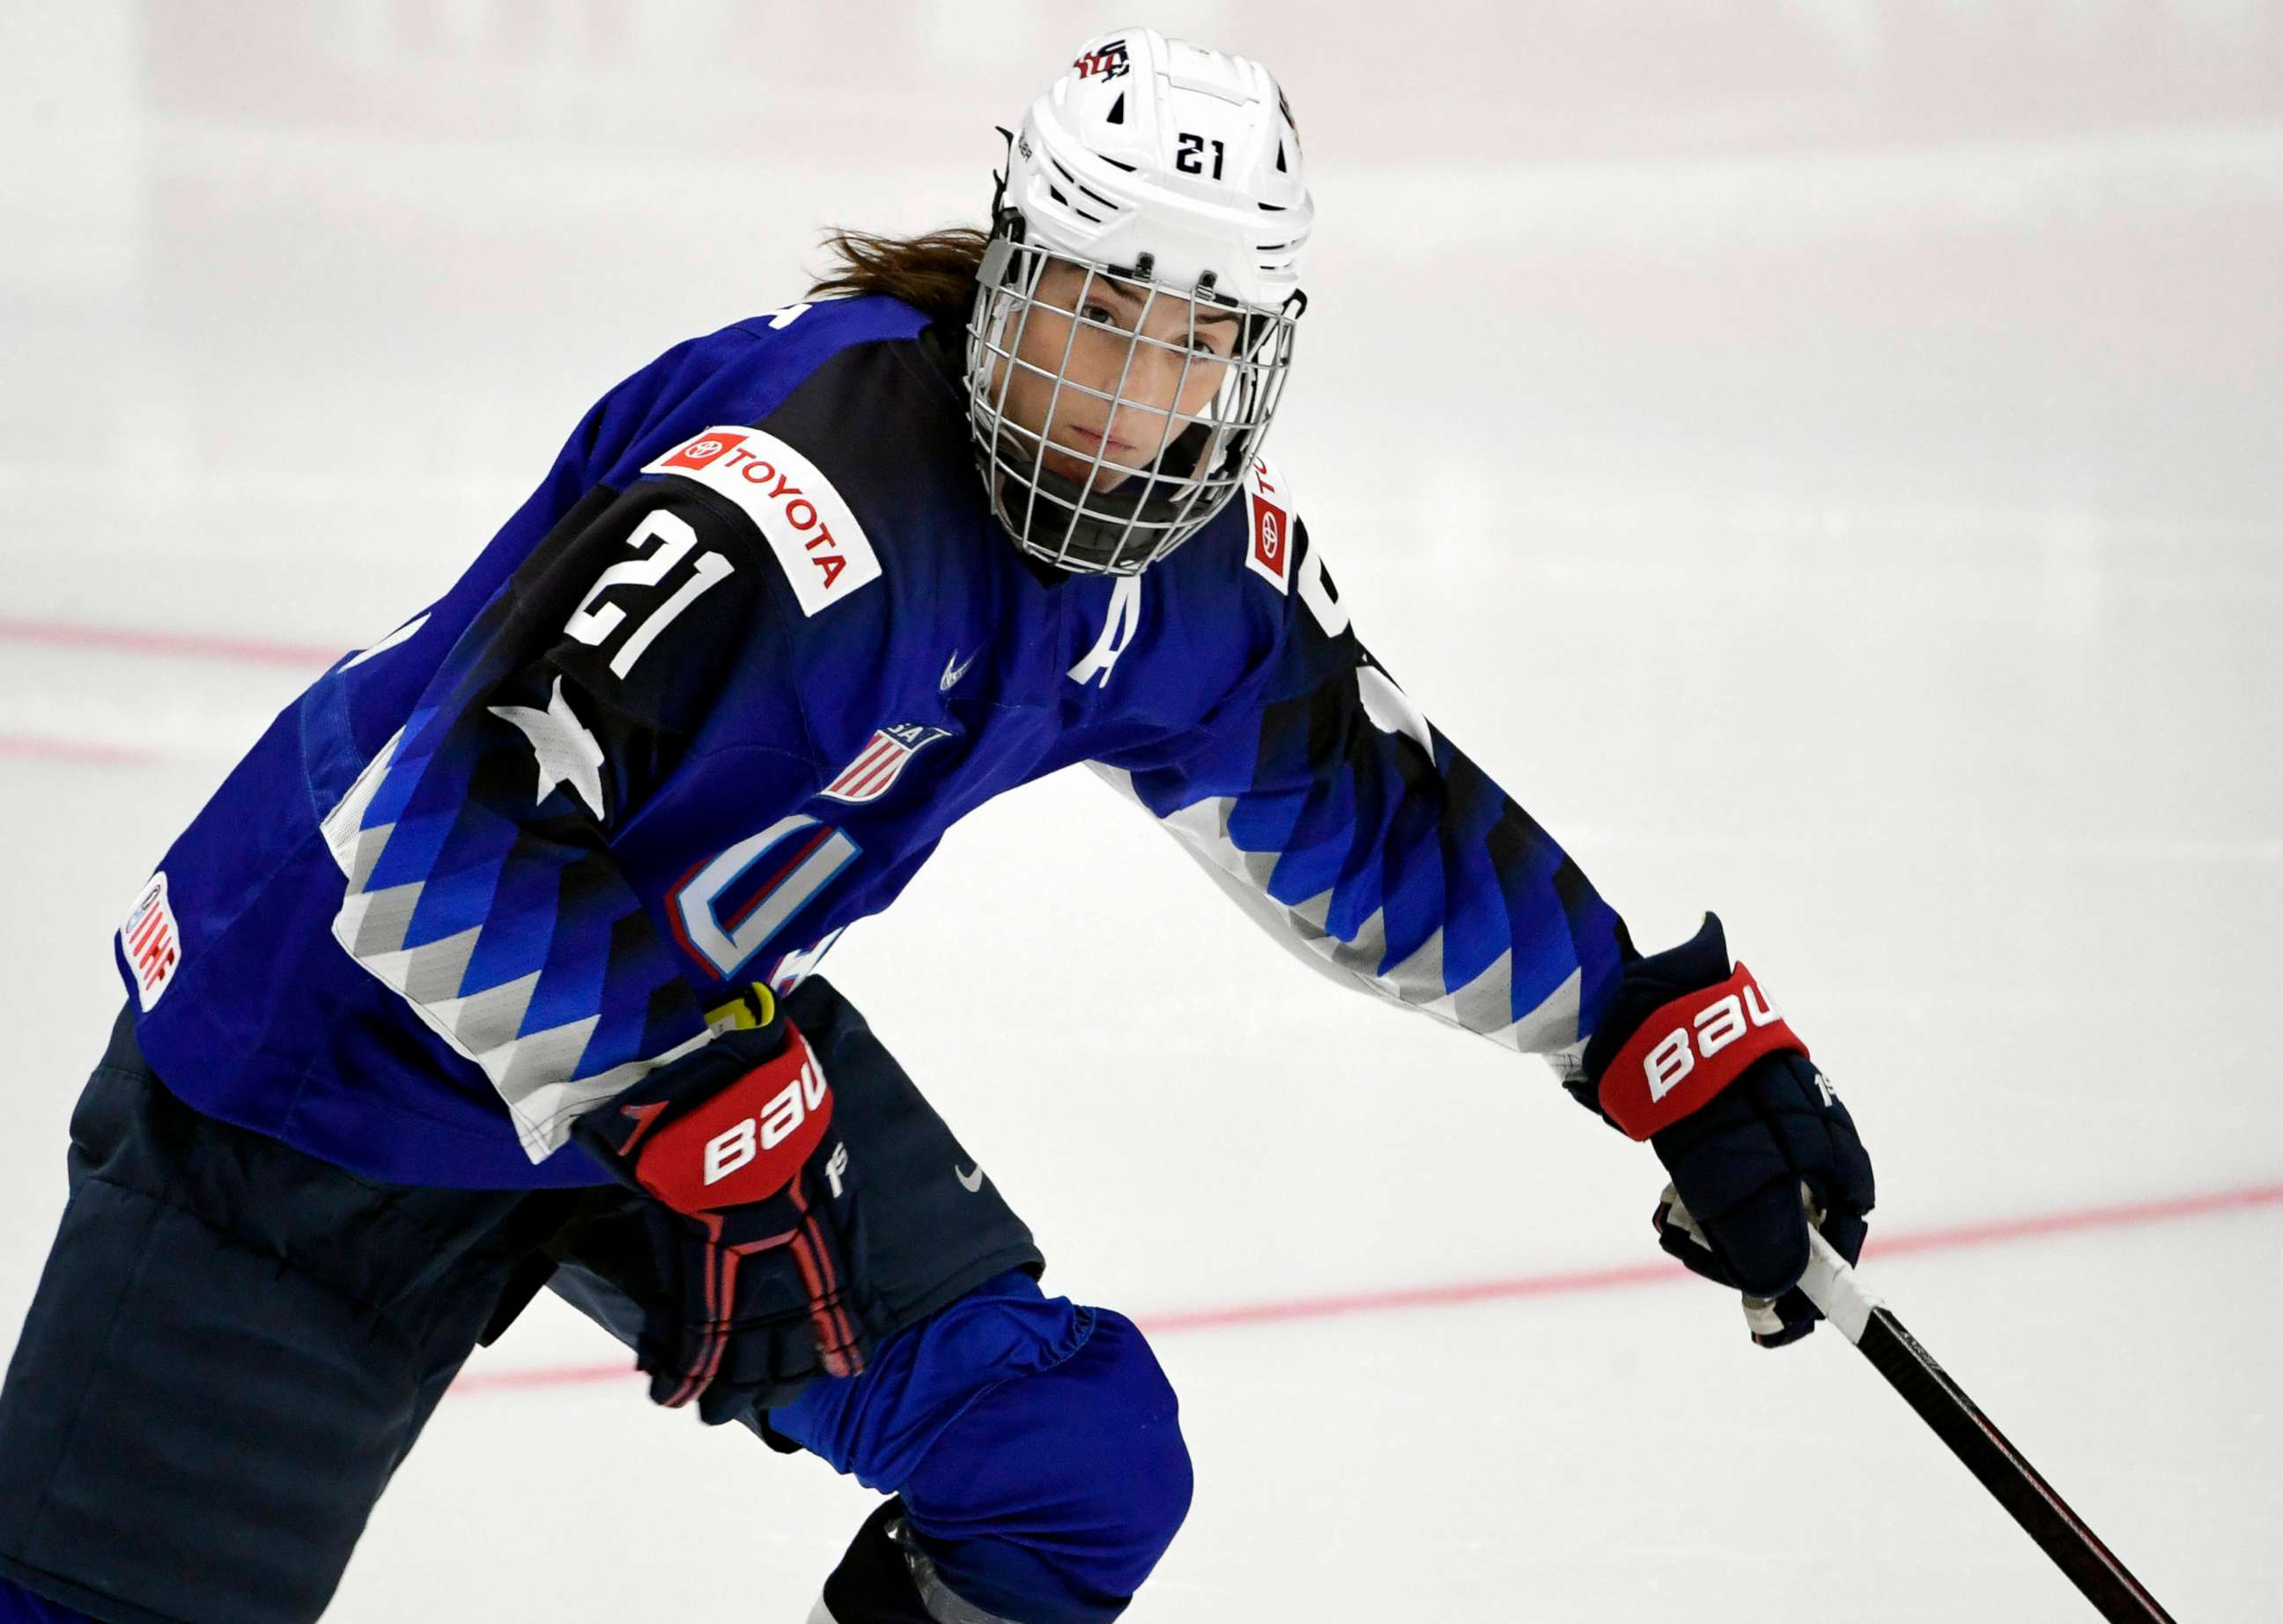 US womens hockey players dominate world competitions, but push for one league back home